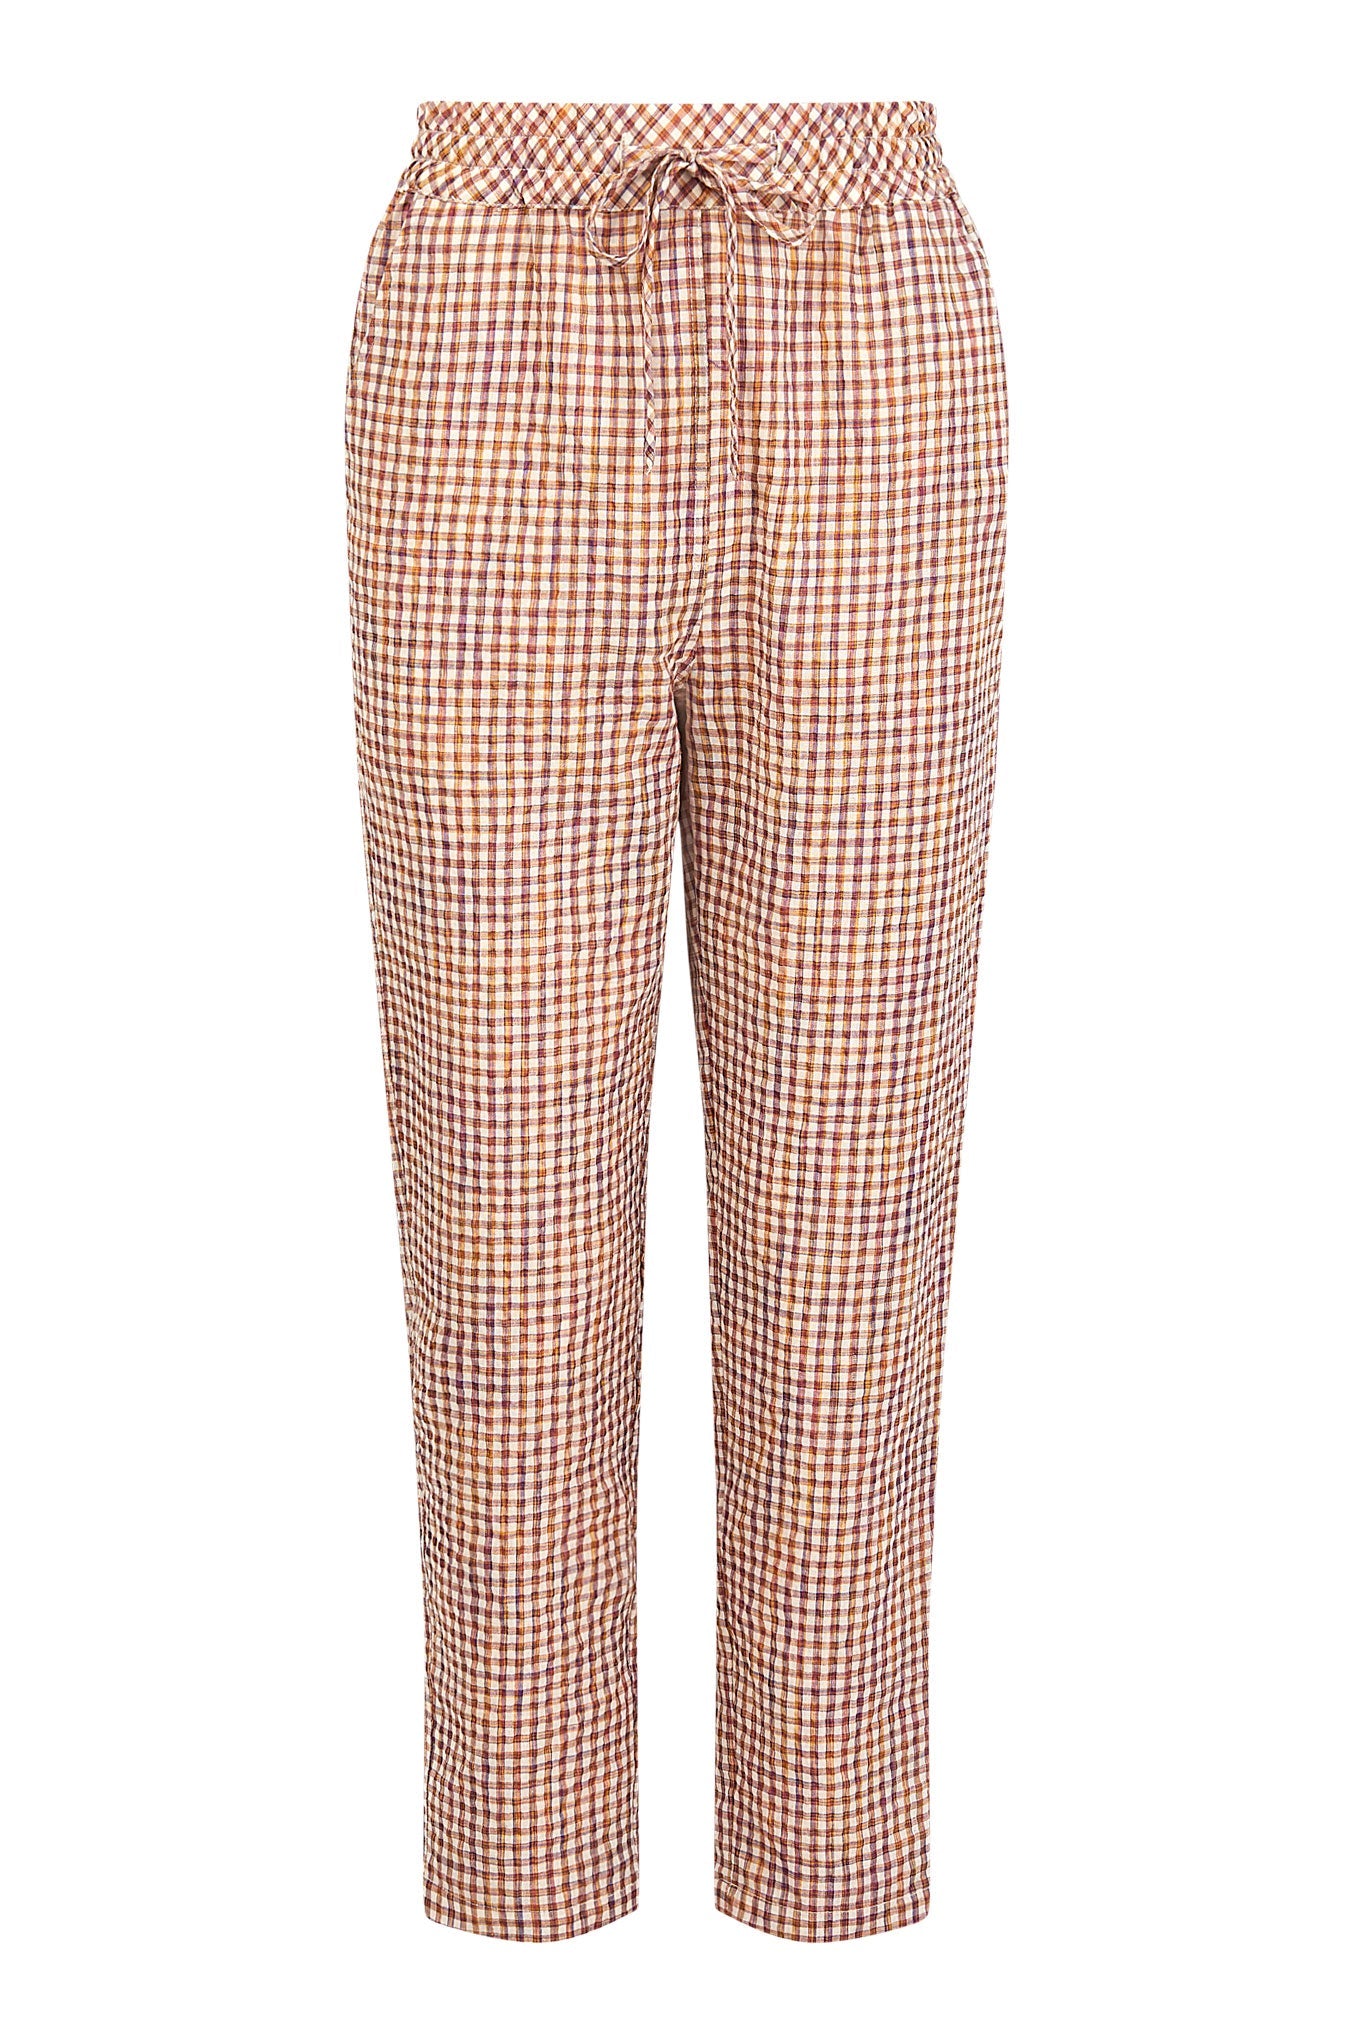 Light brown, checked trousers RAMA made of organic cotton by Komodo